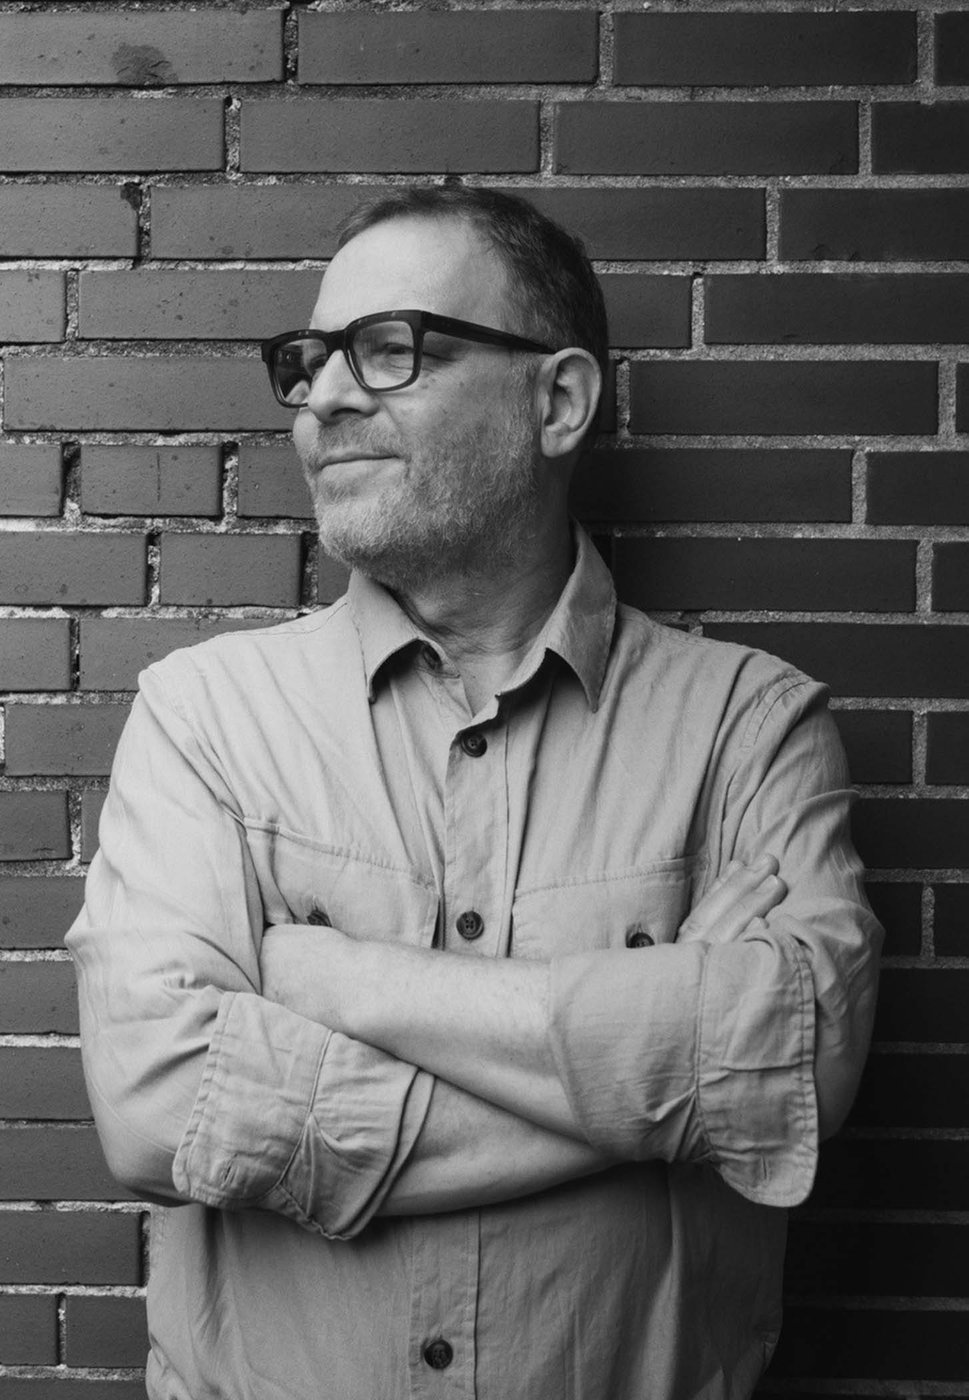 B/W portrait of the author standing in front of a brick wall (portrait format).